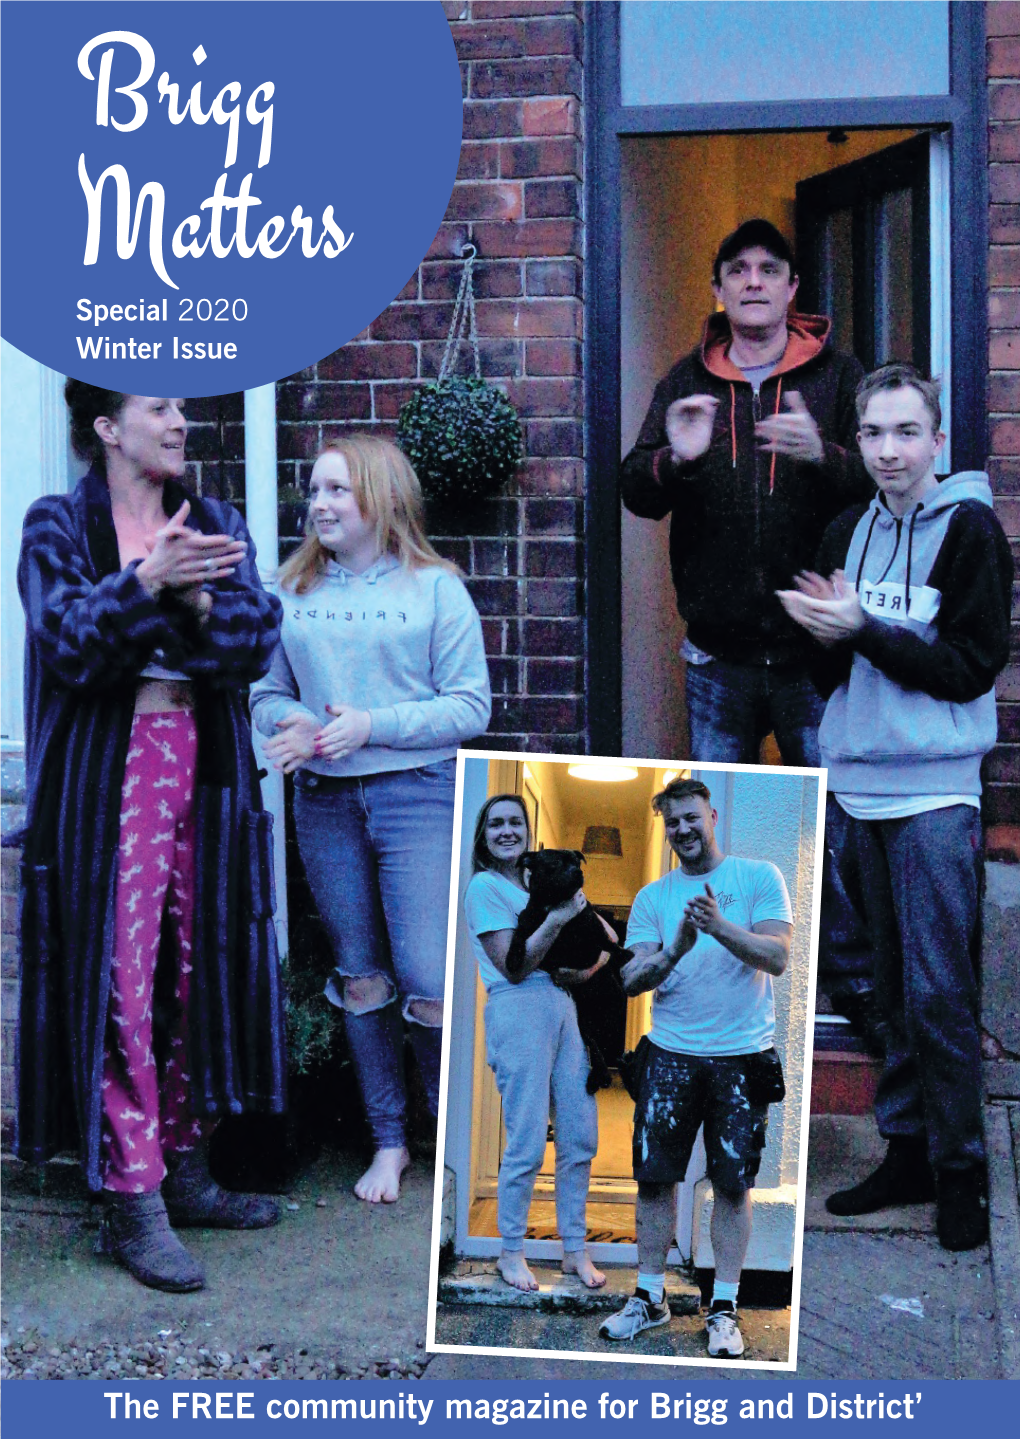 Brigg Matters Special 2020 Winter Issue